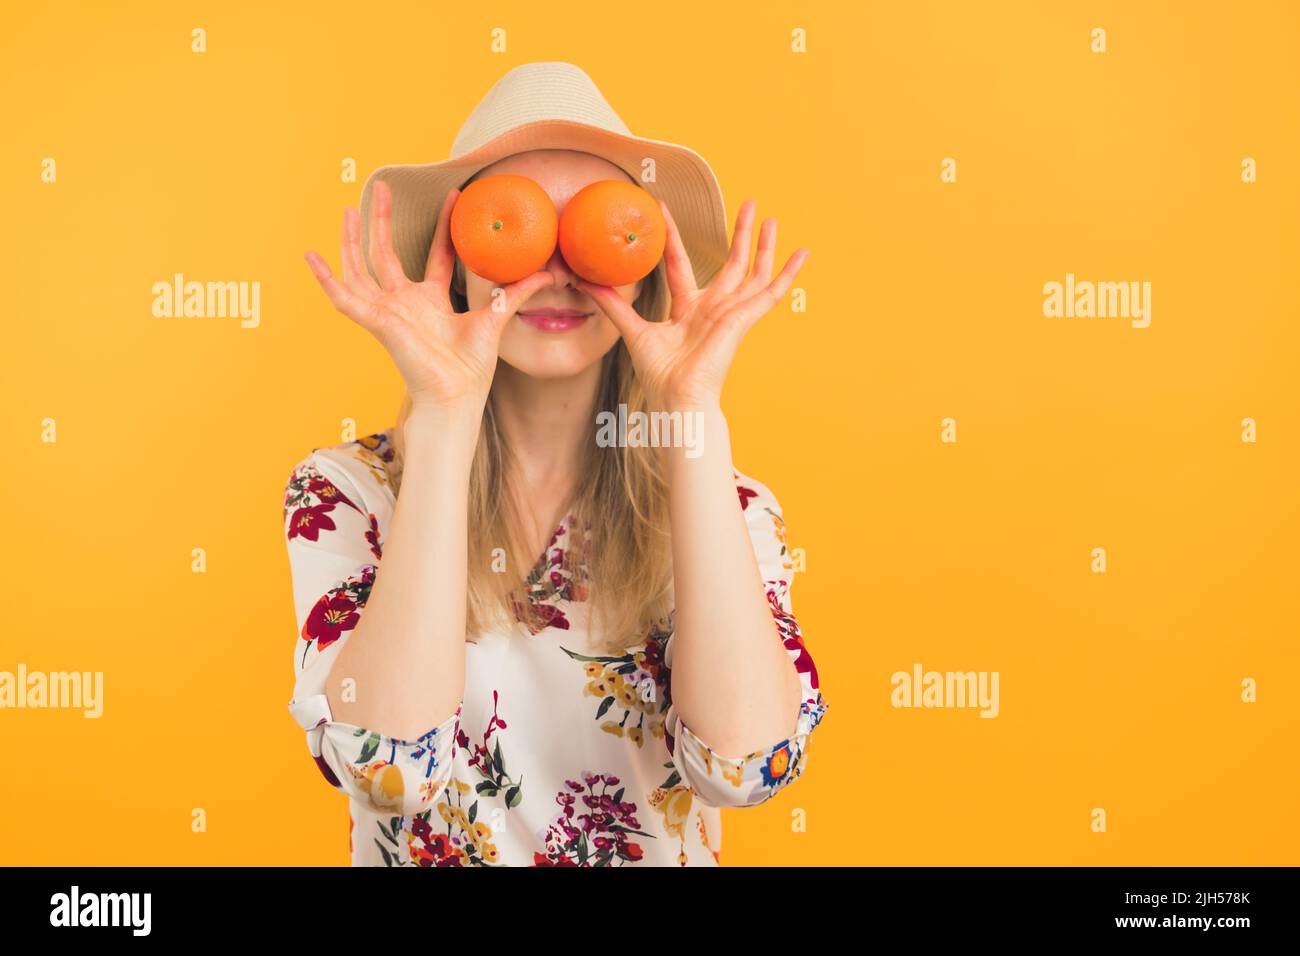 Healthy eating habits concept. Young caucasian long-haired blond person in a hat and floral blouse covering eyes with two vibrant oranges. Studio shot orange background. High quality photo Stock Photo